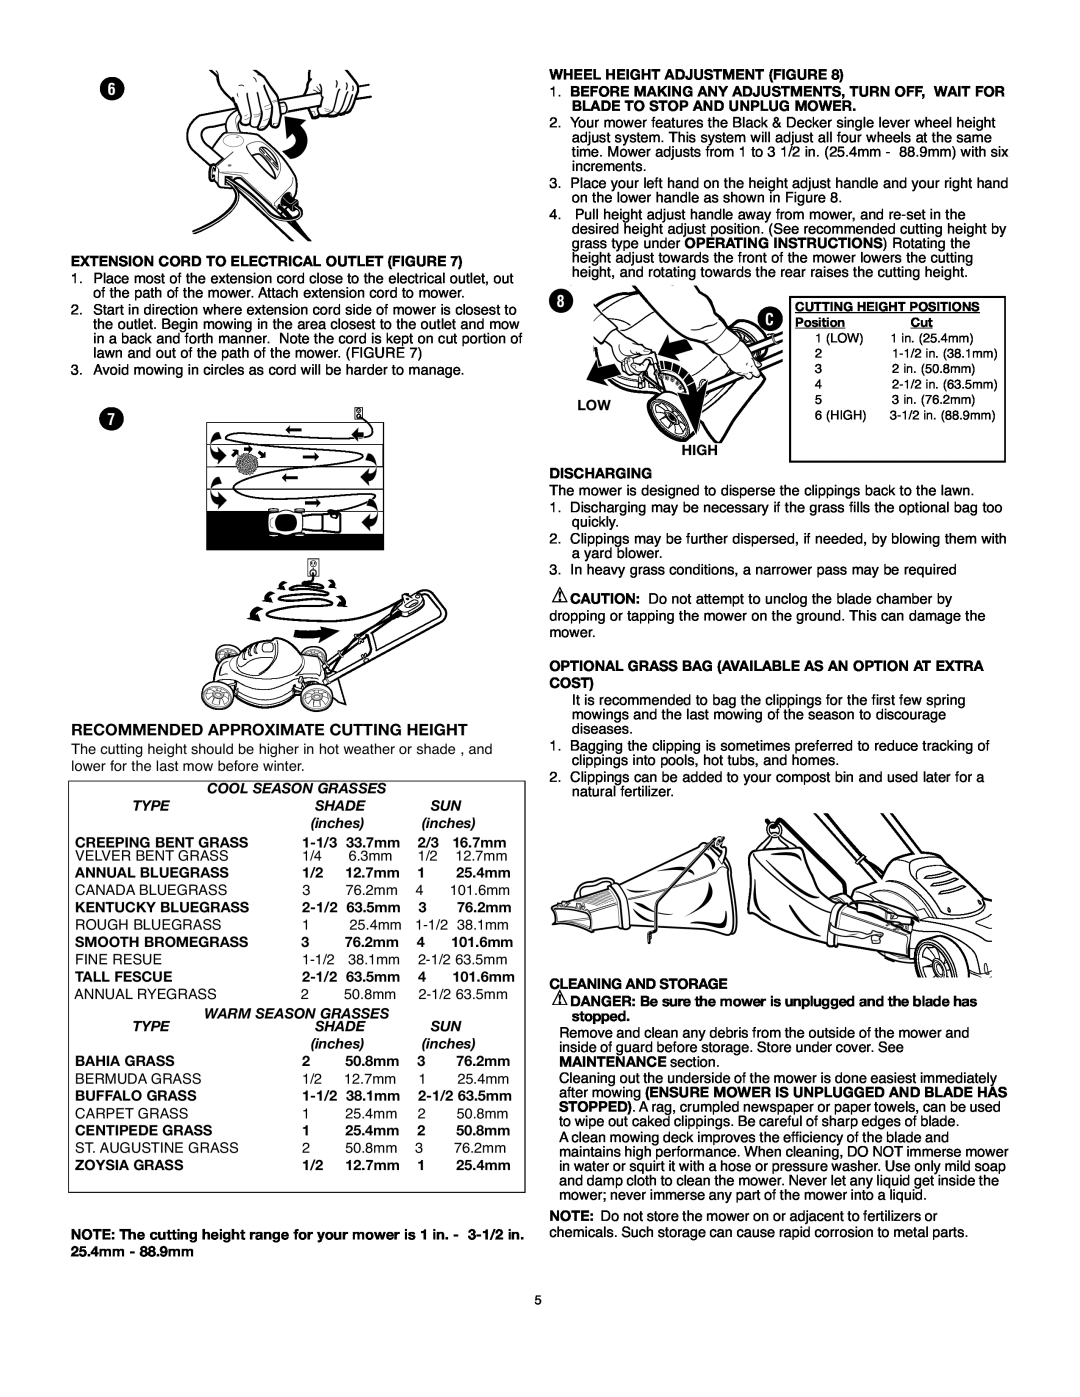 Black & Decker LM175 instruction manual Recommended Approximate Cutting Height 